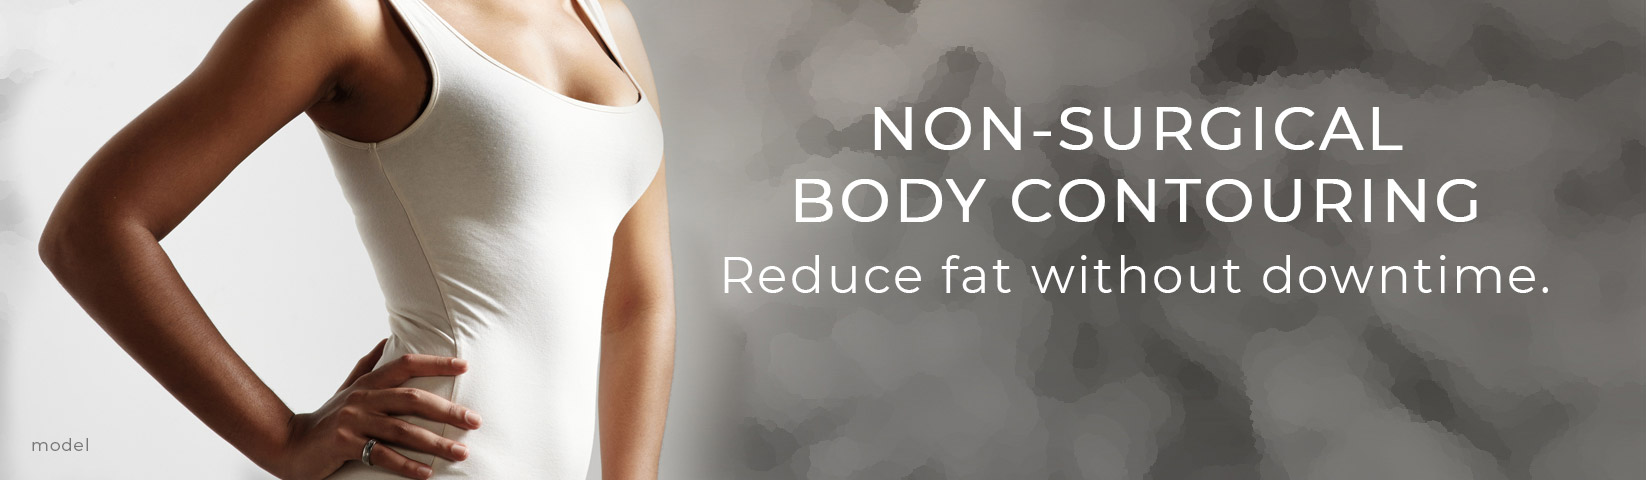 Non-surgical body contouring: Reduce Fat without downtime